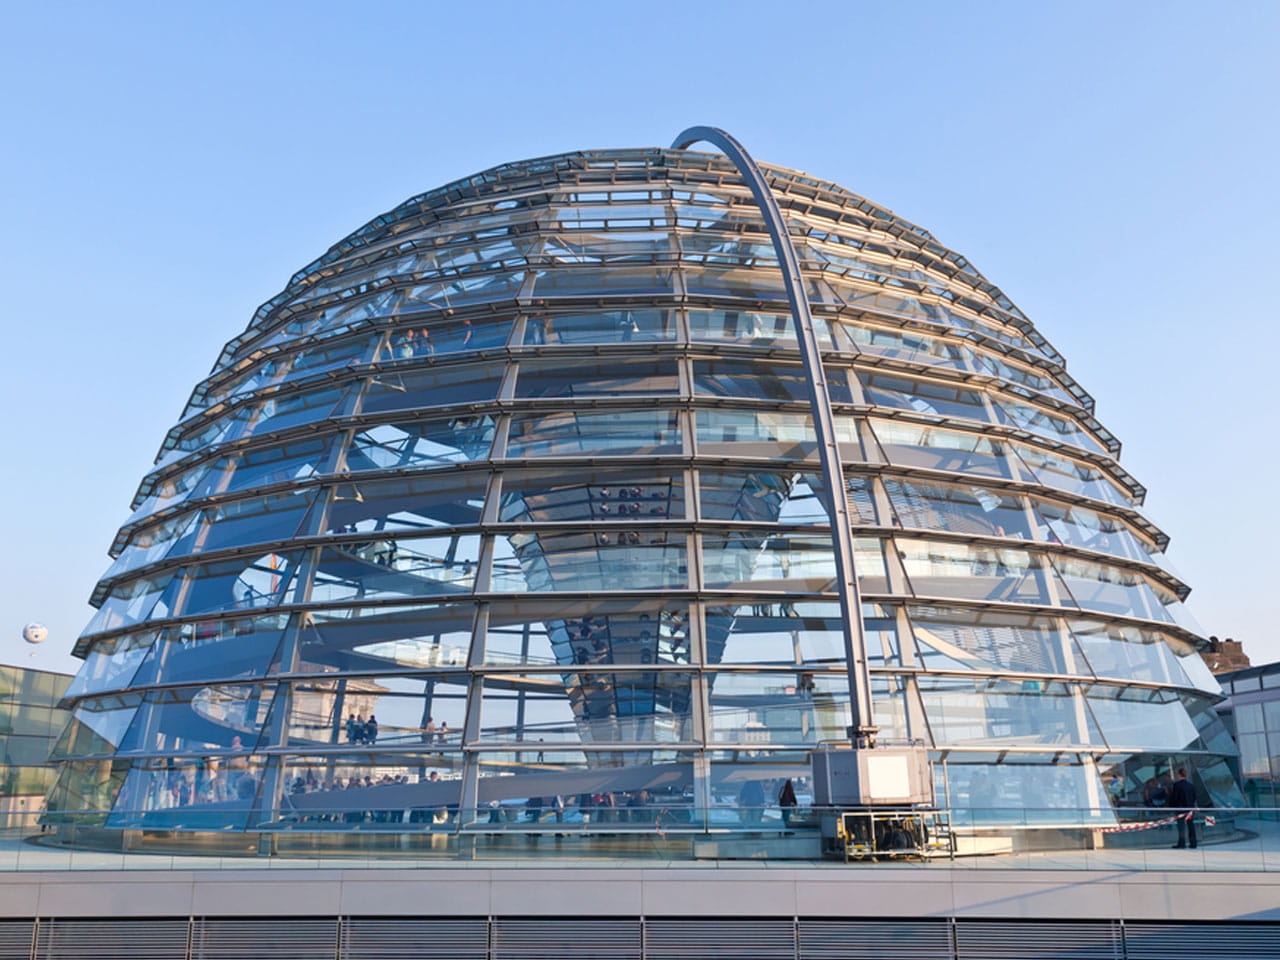 Reichstag Dome in Berlin